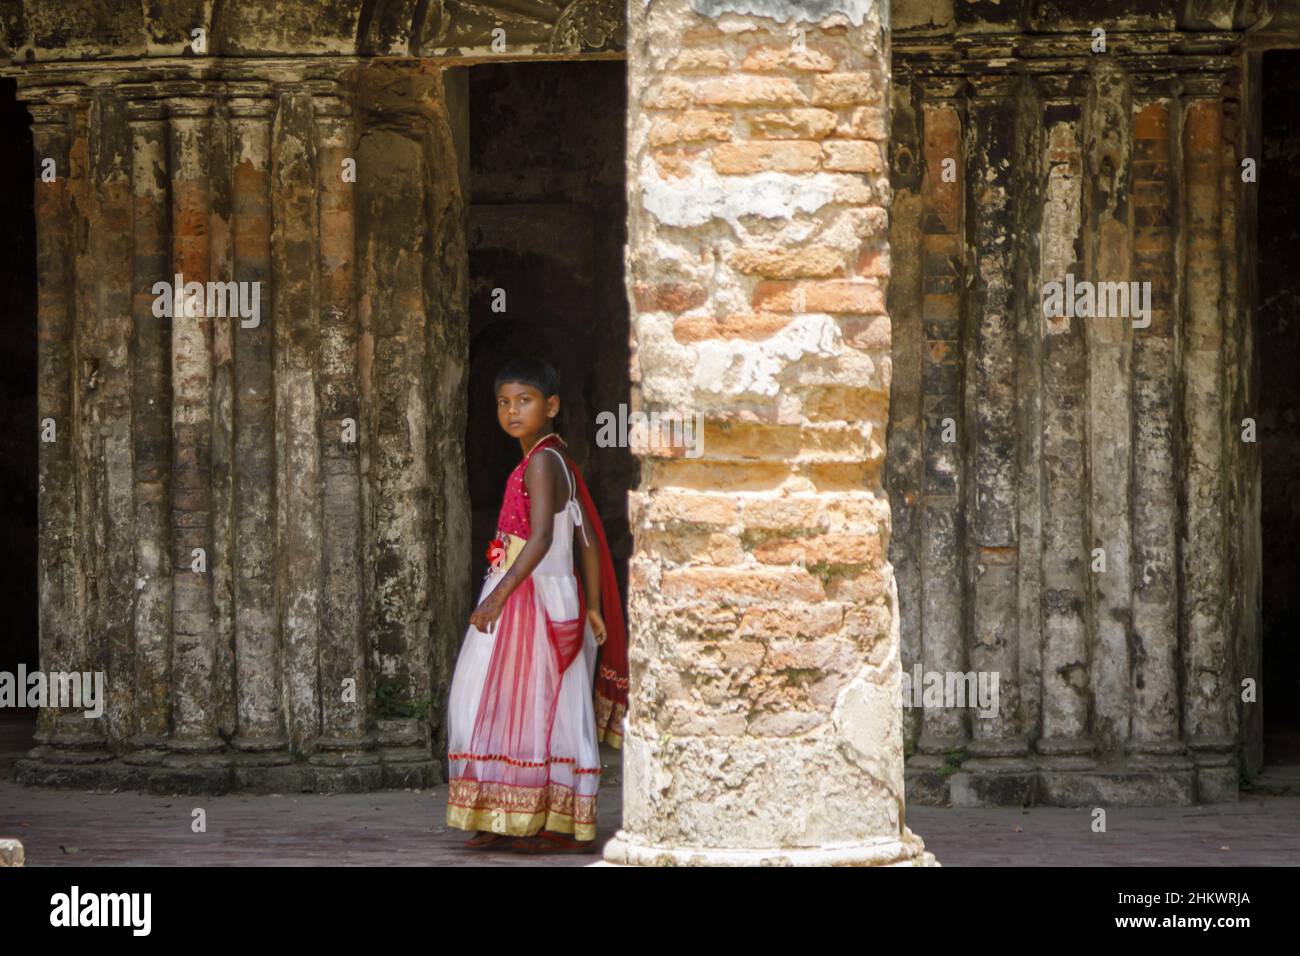 A young girl walking in the ruins of the Teota Zamindar Palace in the Manikganj district. The palace, believed to be around 300 years old, had more than 50 rooms originally. Stock Photo